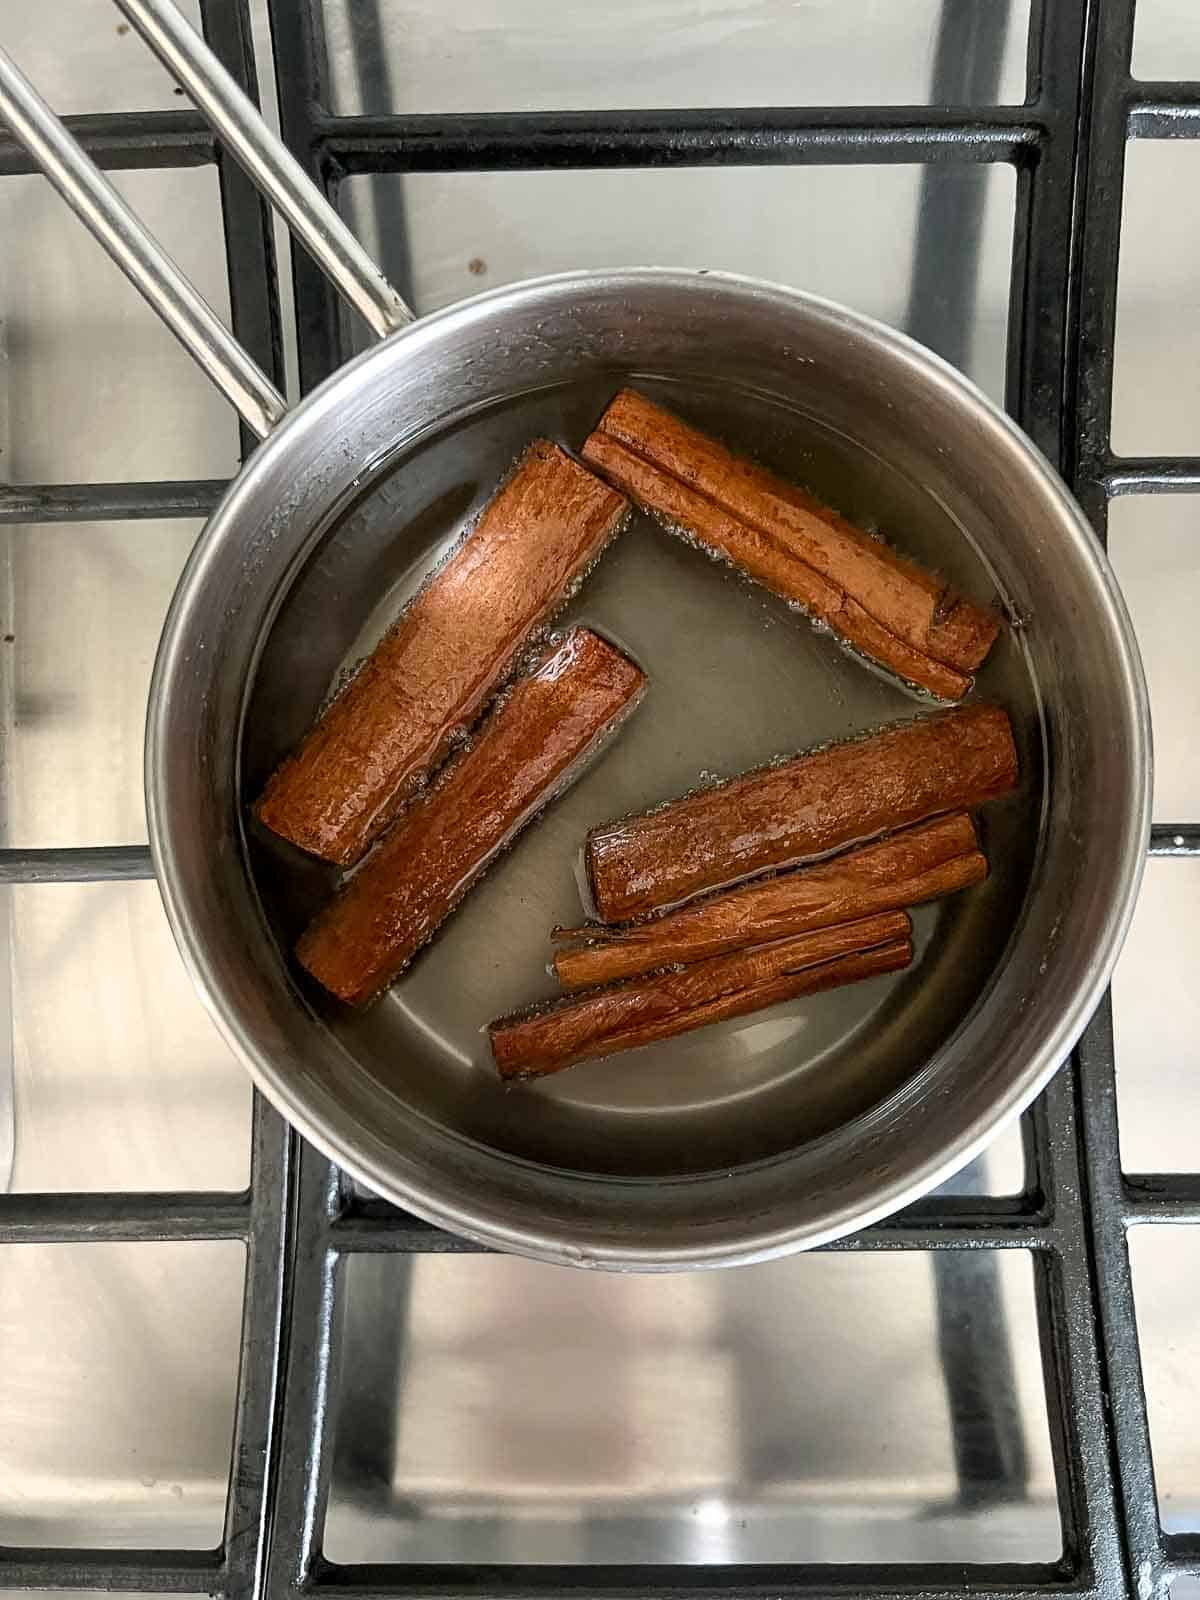 Cinnamon sticks added to a sugar and water syrup.